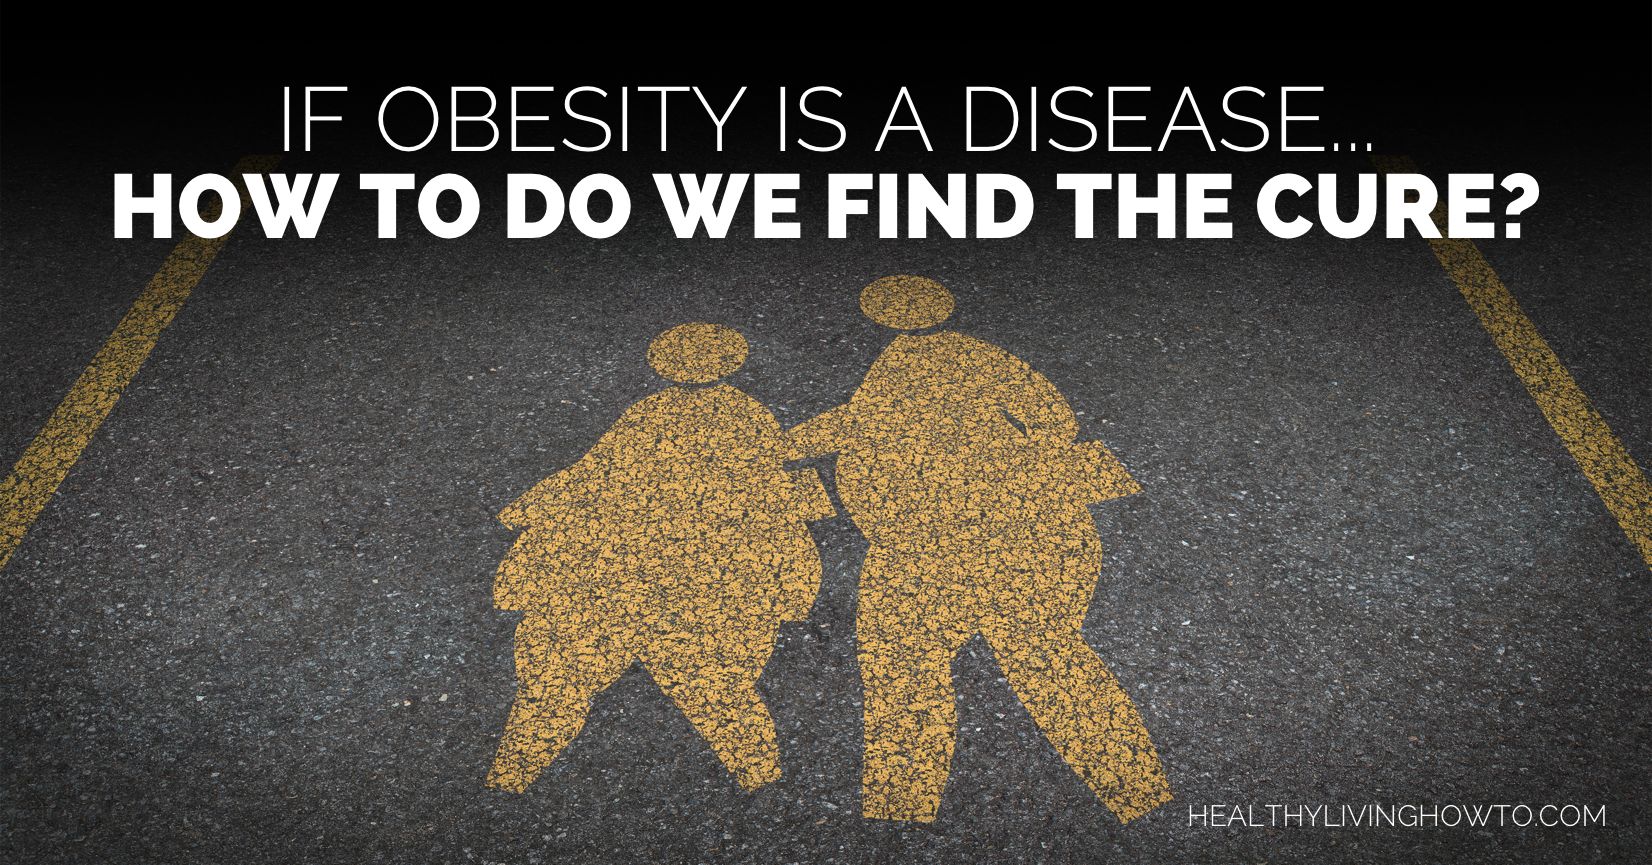 If Obesity Is A Disease...How Do We Find A Cure? | healthylivinghowto.com